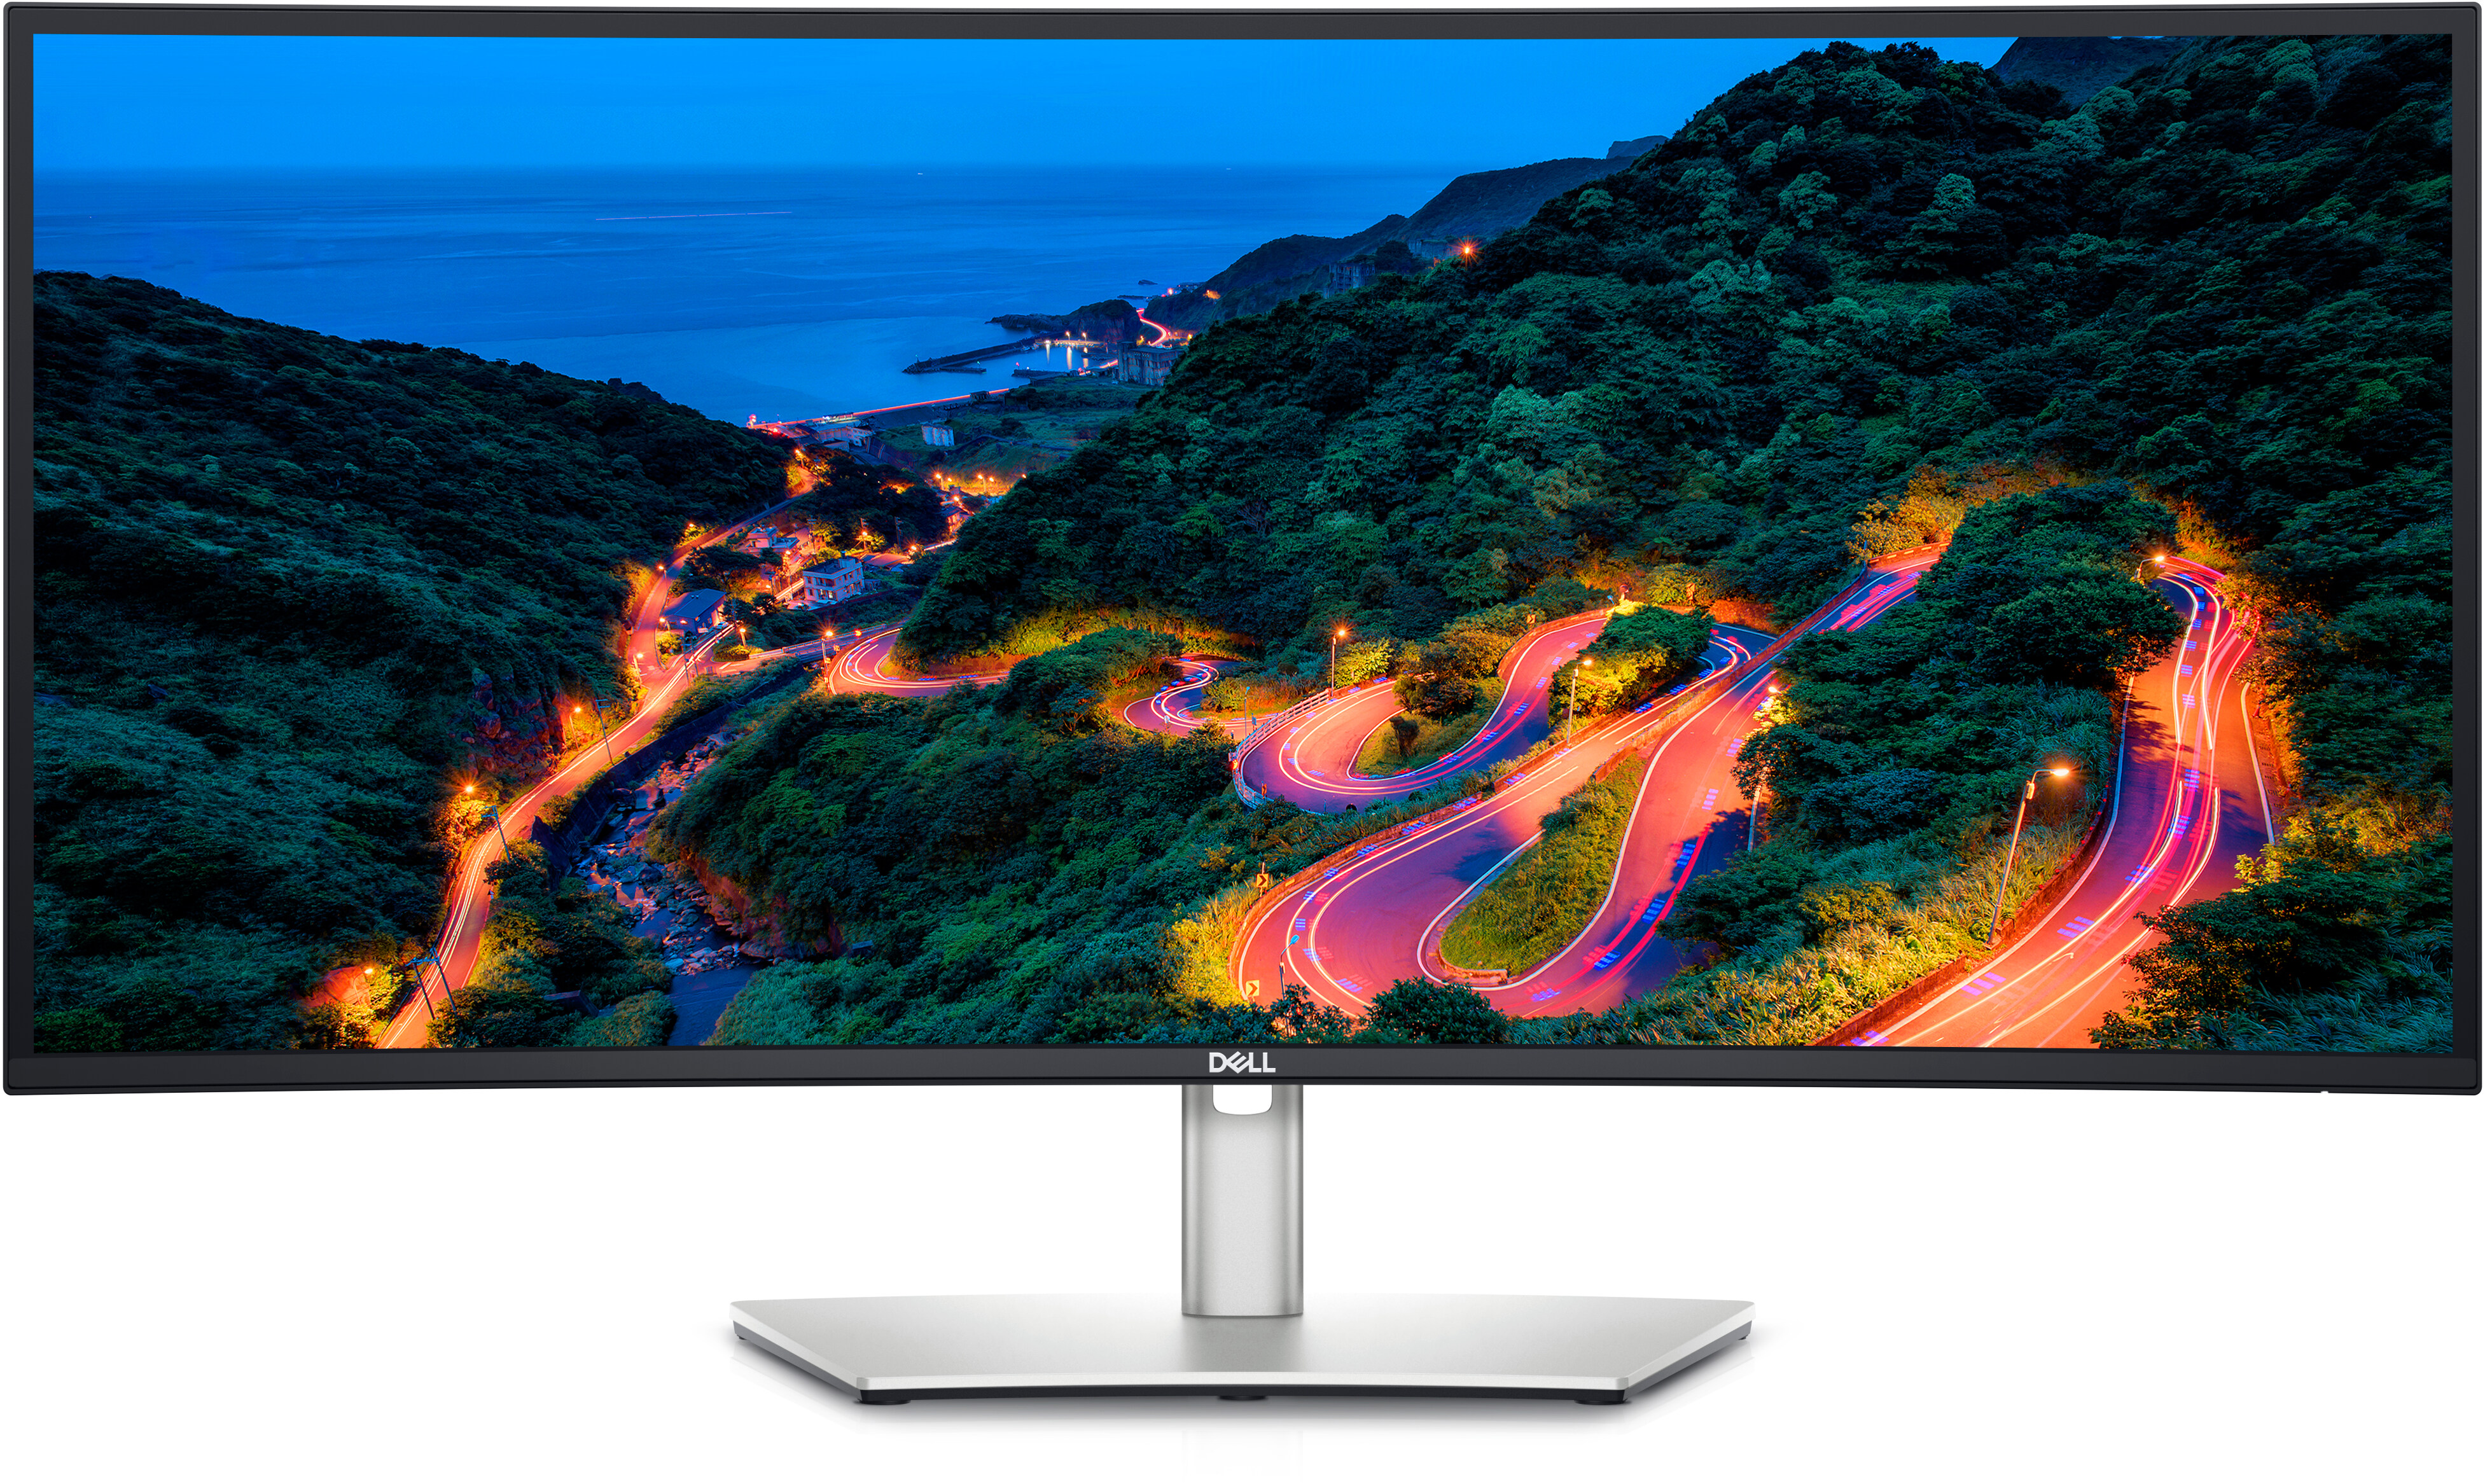 https://i.dell.com/is/image/DellContent/content/dam/ss2/product-images/peripherals/output-devices/dell/monitors/u3423we/media-gallery/monitor-u3423we-silver-gallery-2.psd?fmt=pjpg&pscan=auto&scl=1&wid=3906&hei=2333&qlt=100,1&resMode=sharp2&size=3906,2333&chrss=full&imwidth=5000